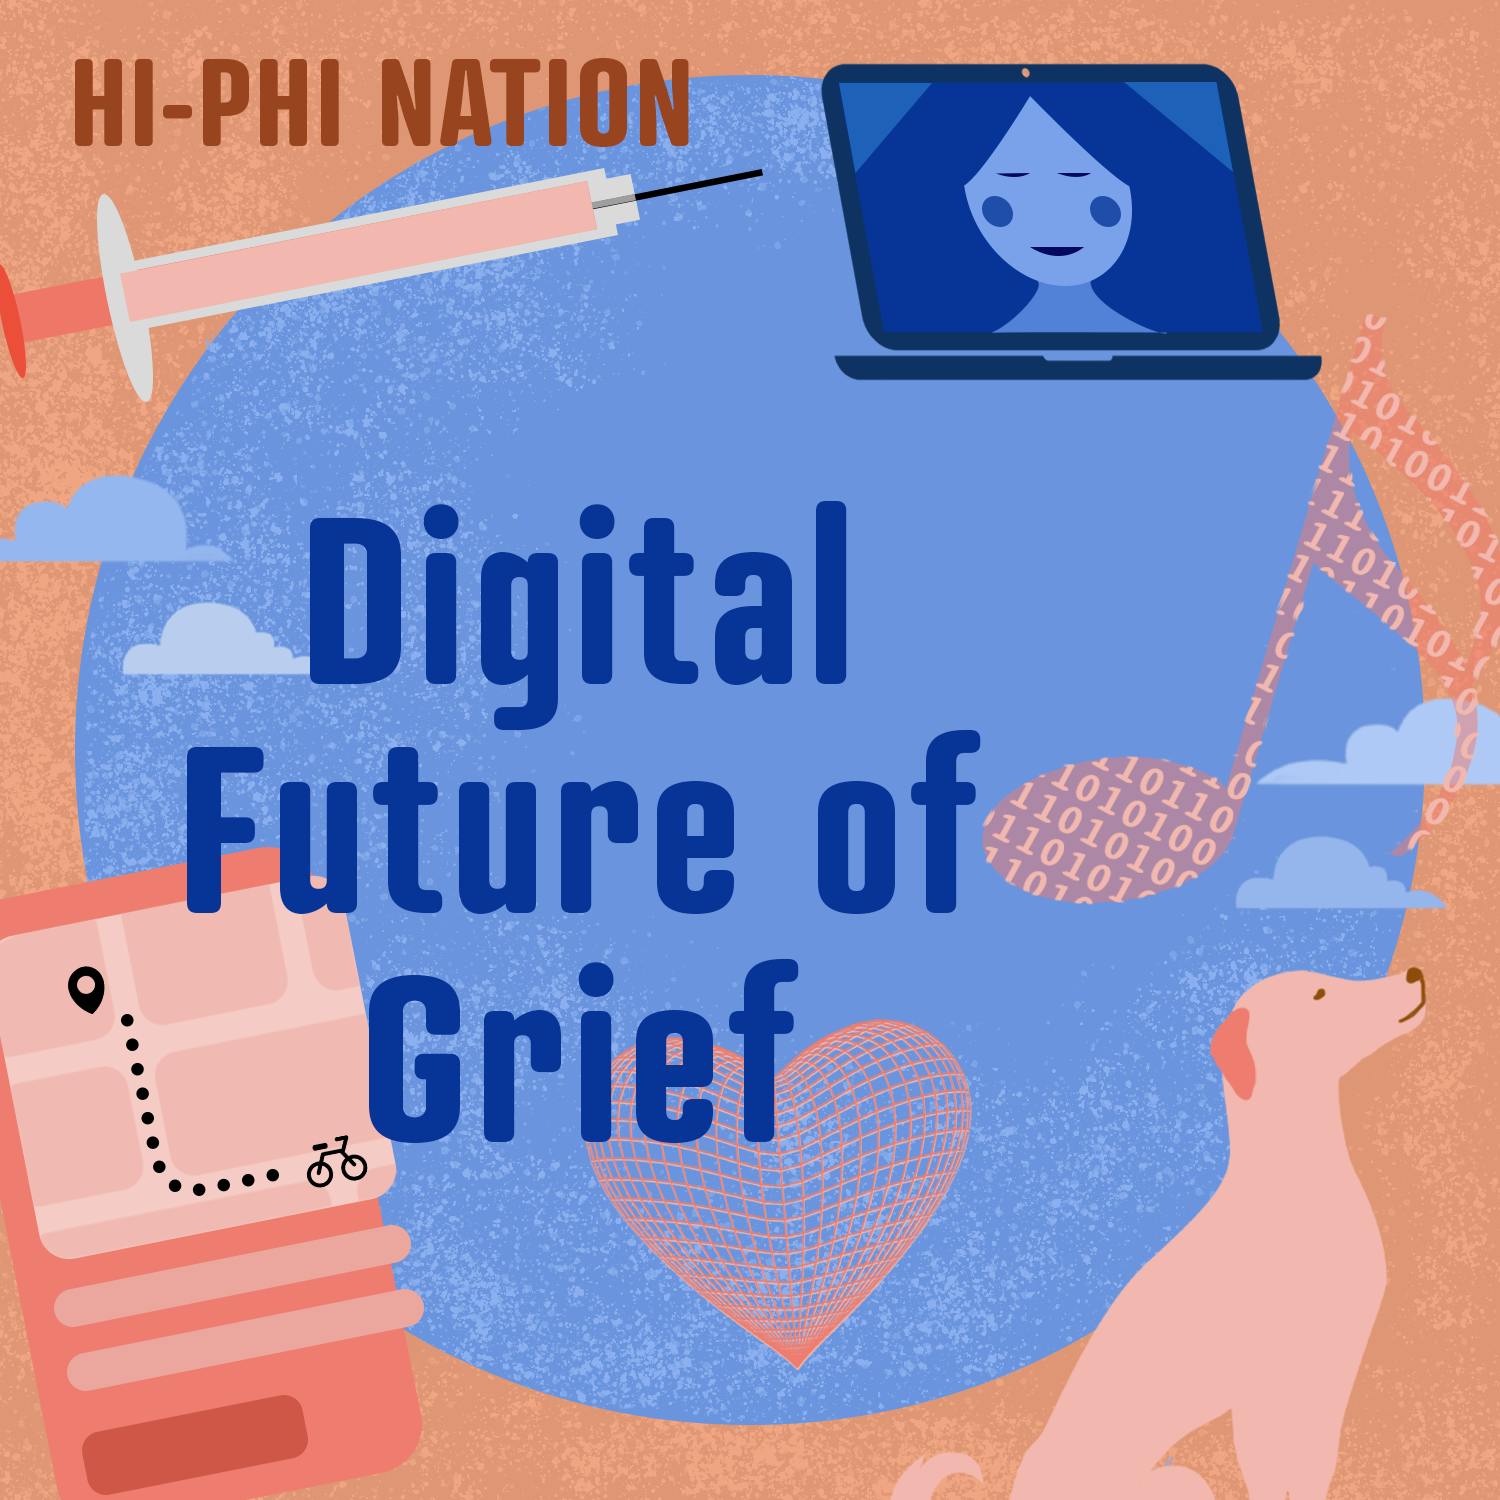 The Digital Future of Grief